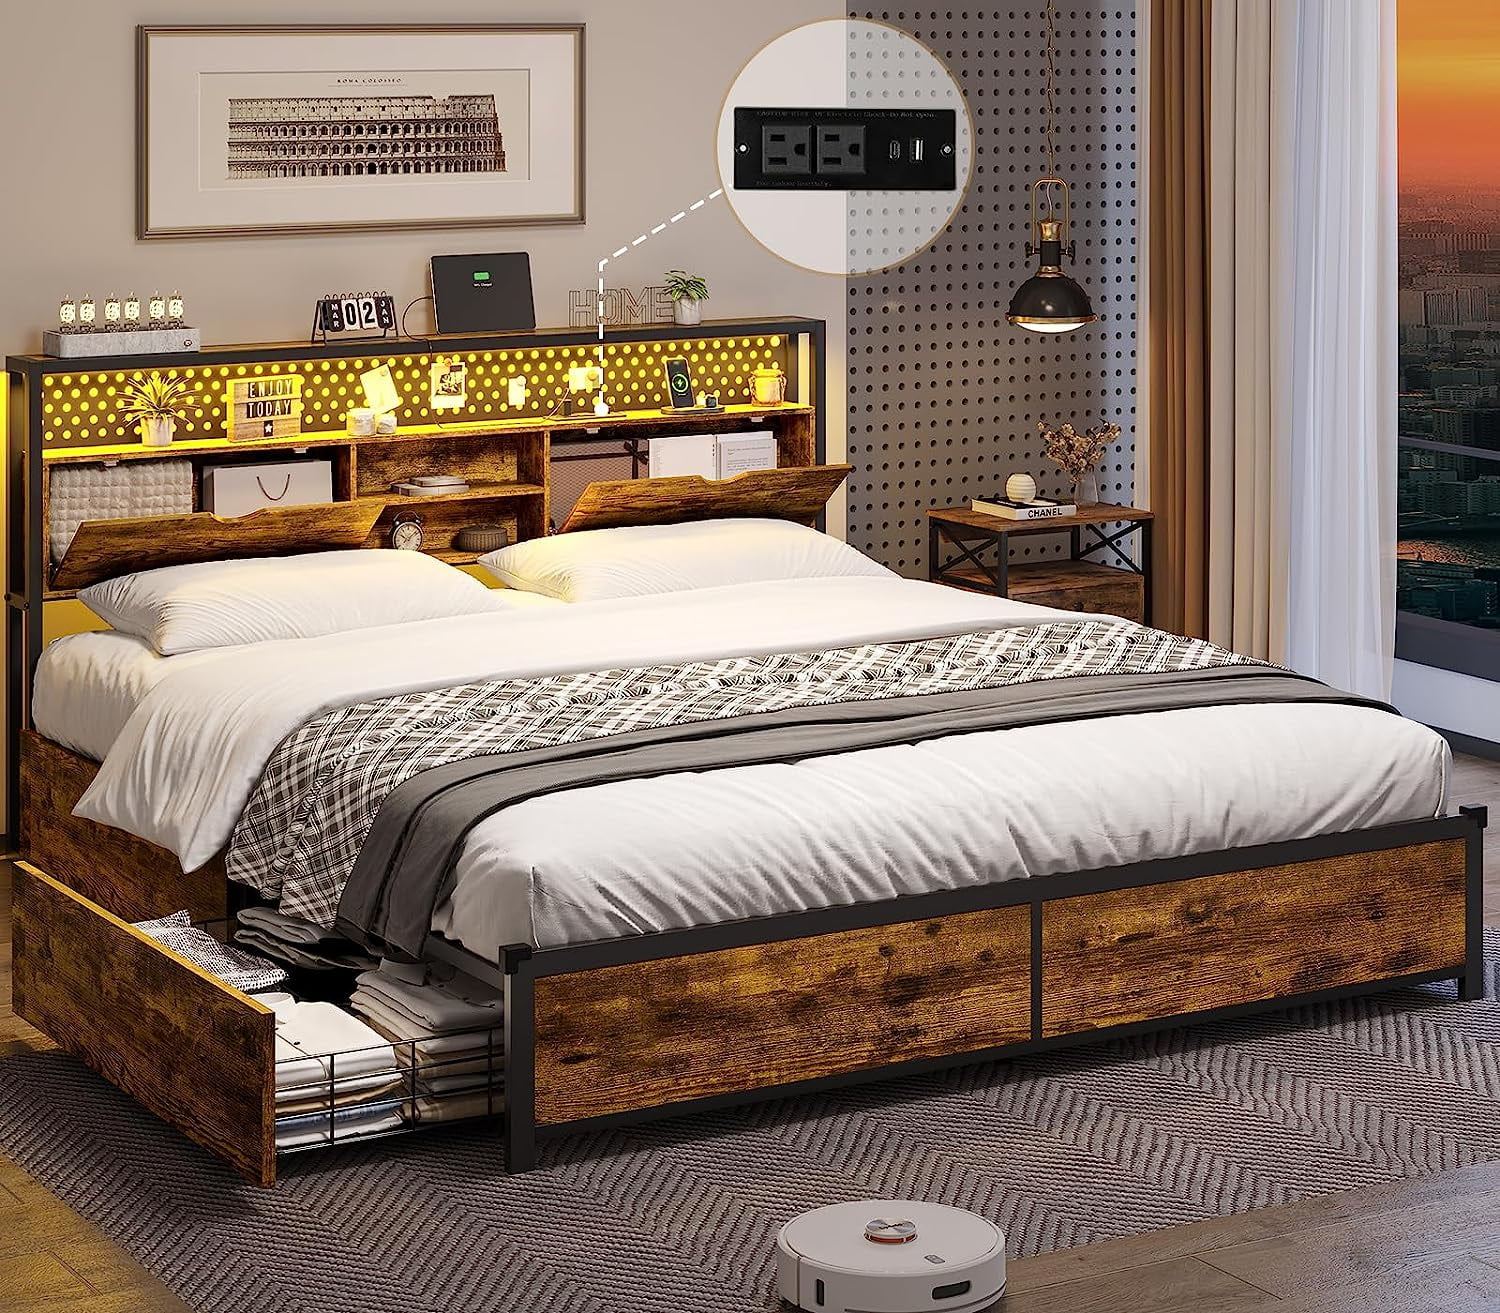 IRONCK Full Size Bed Frame with Drawers, Ergonomic Storage Headboard with  Charging Station, LED Ligh…See more IRONCK Full Size Bed Frame with  Drawers